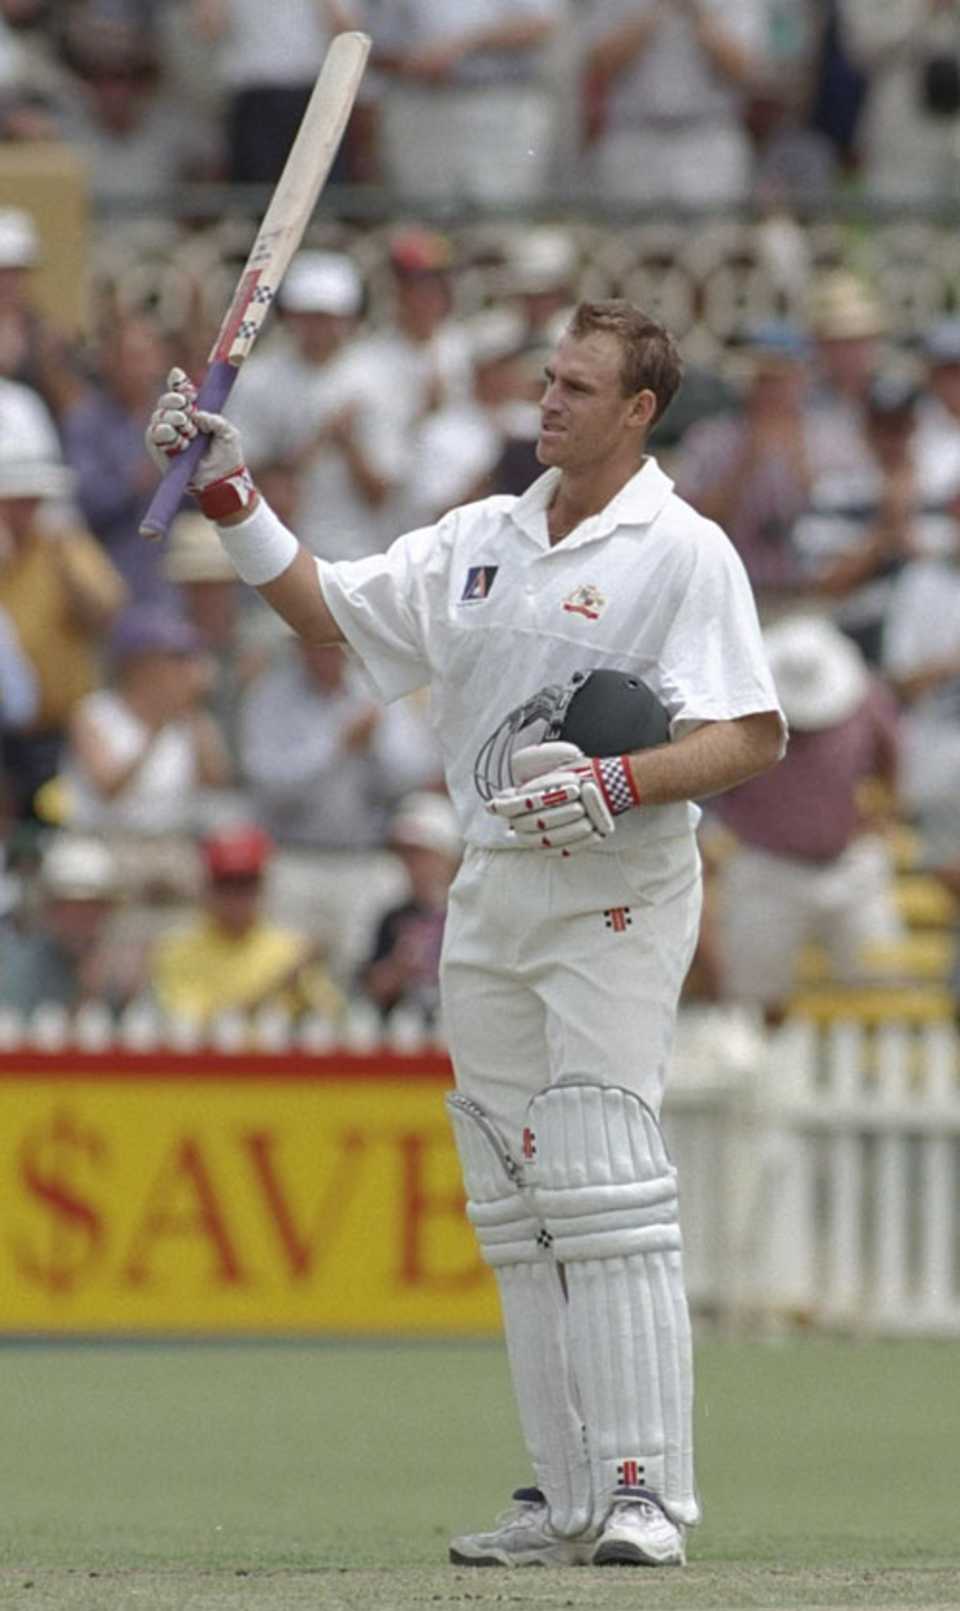 Matthew Hayden acknowledges the applause after reaching his first Test century, Australia v West Indies, 4th Test, Adelaide, 2nd day, January 26, 1997